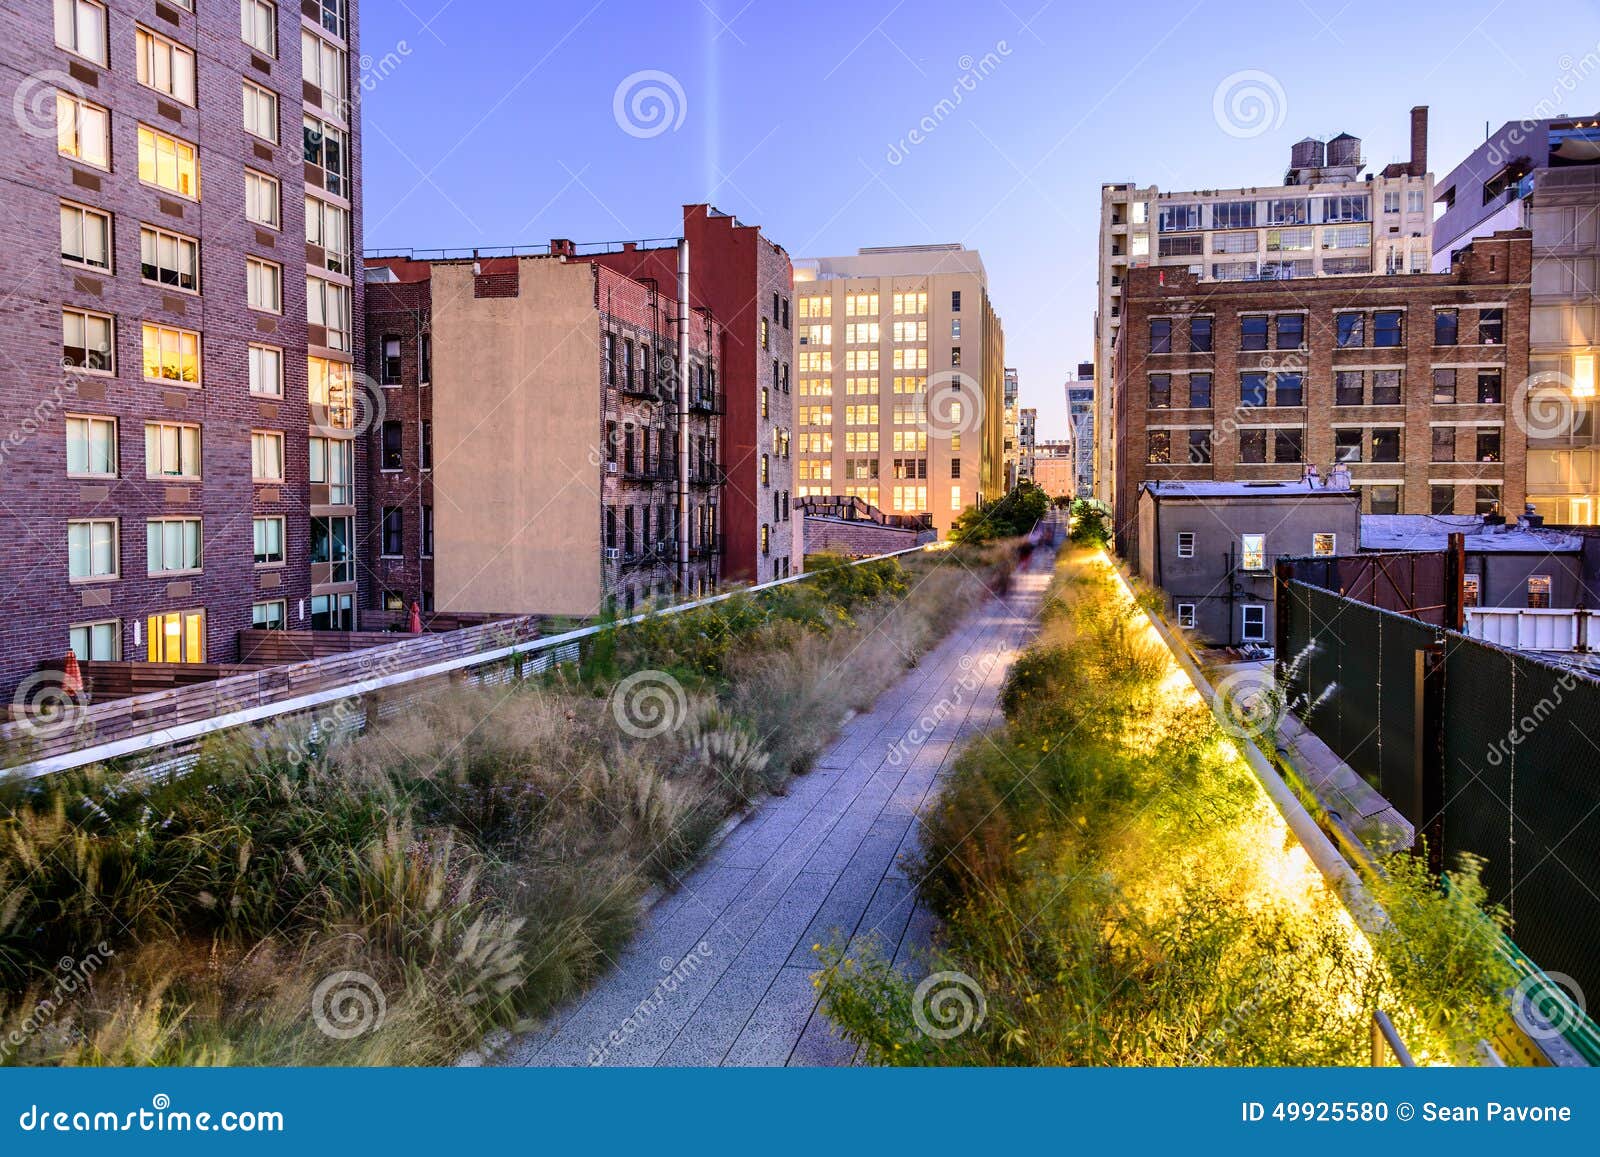 high line in new york